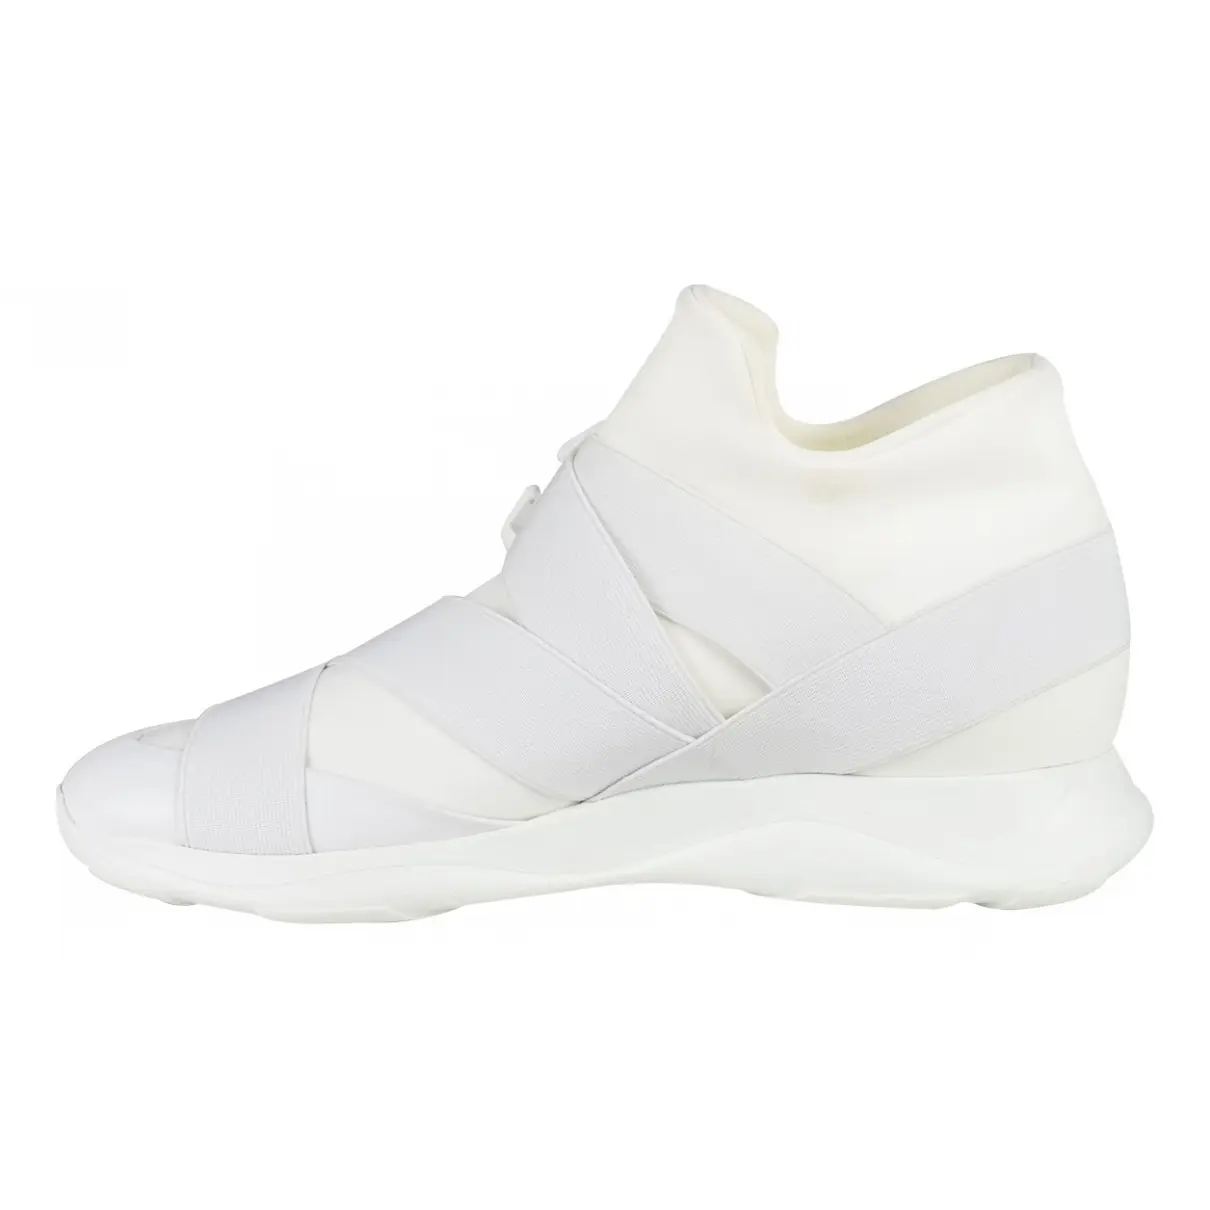 Trainers Christopher Kane